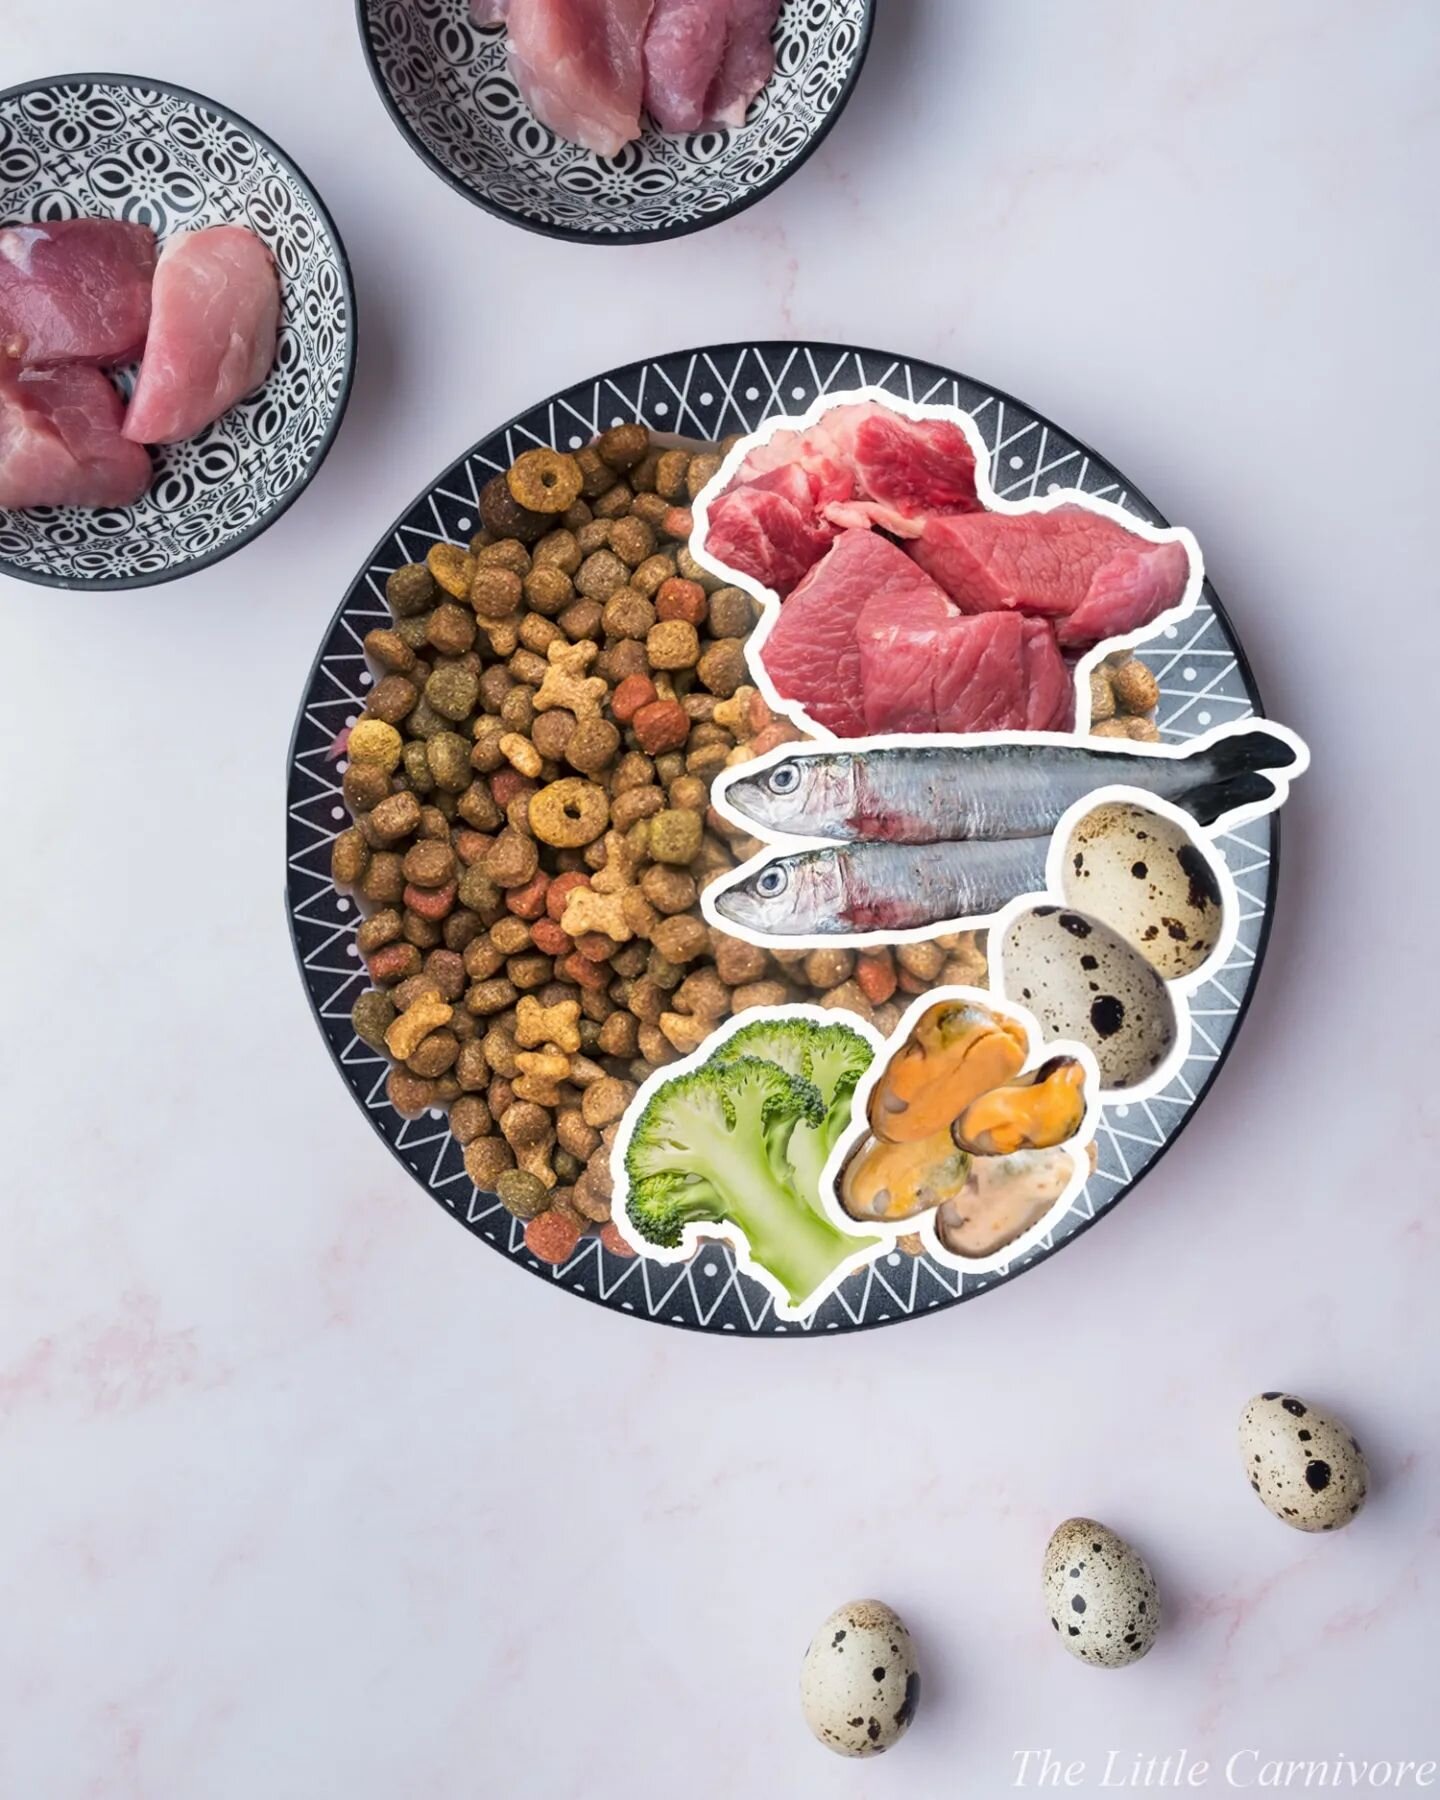 🚨 New article on the website 🚨
🥩 Not everyone can feed a raw diet, for various reasons, costs, logistics... Though it doesn't mean you can't add fresh food to your cat's diet!
🍖 You can add up to 20% of the calories as fresh food, not more so you